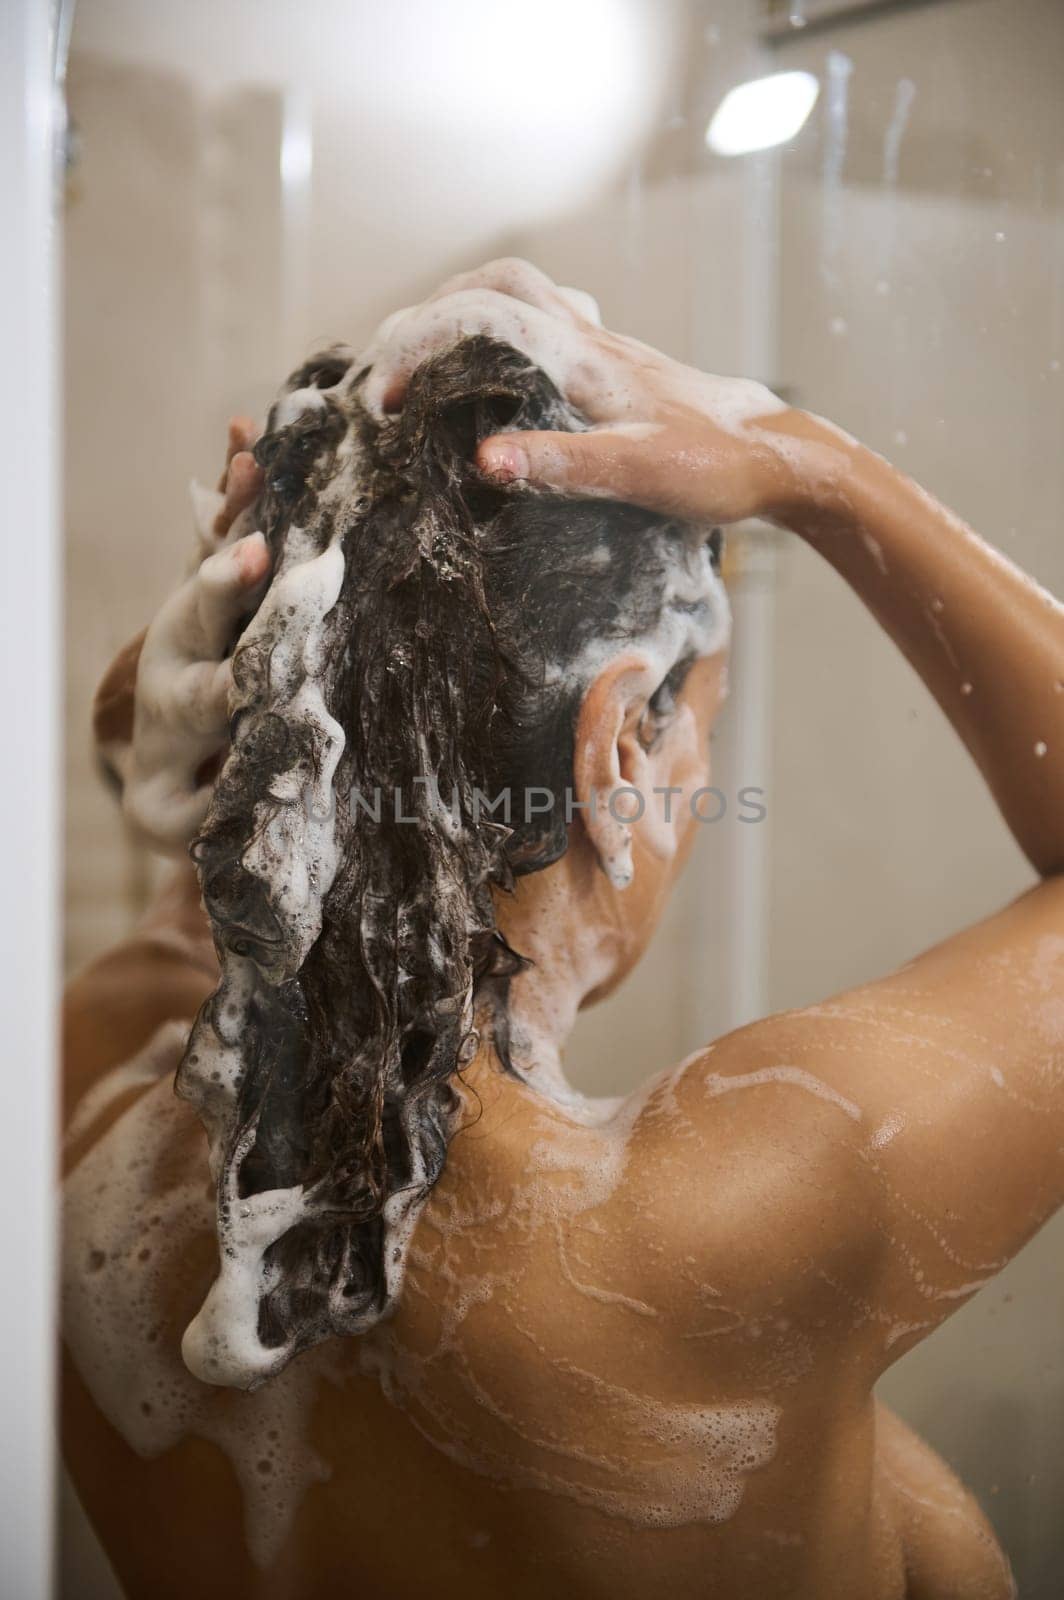 Rear view of pretty woman shampooing hair, showering with moisturizing foam for skin care and body freshness in a douche cabin. Close-up by artgf